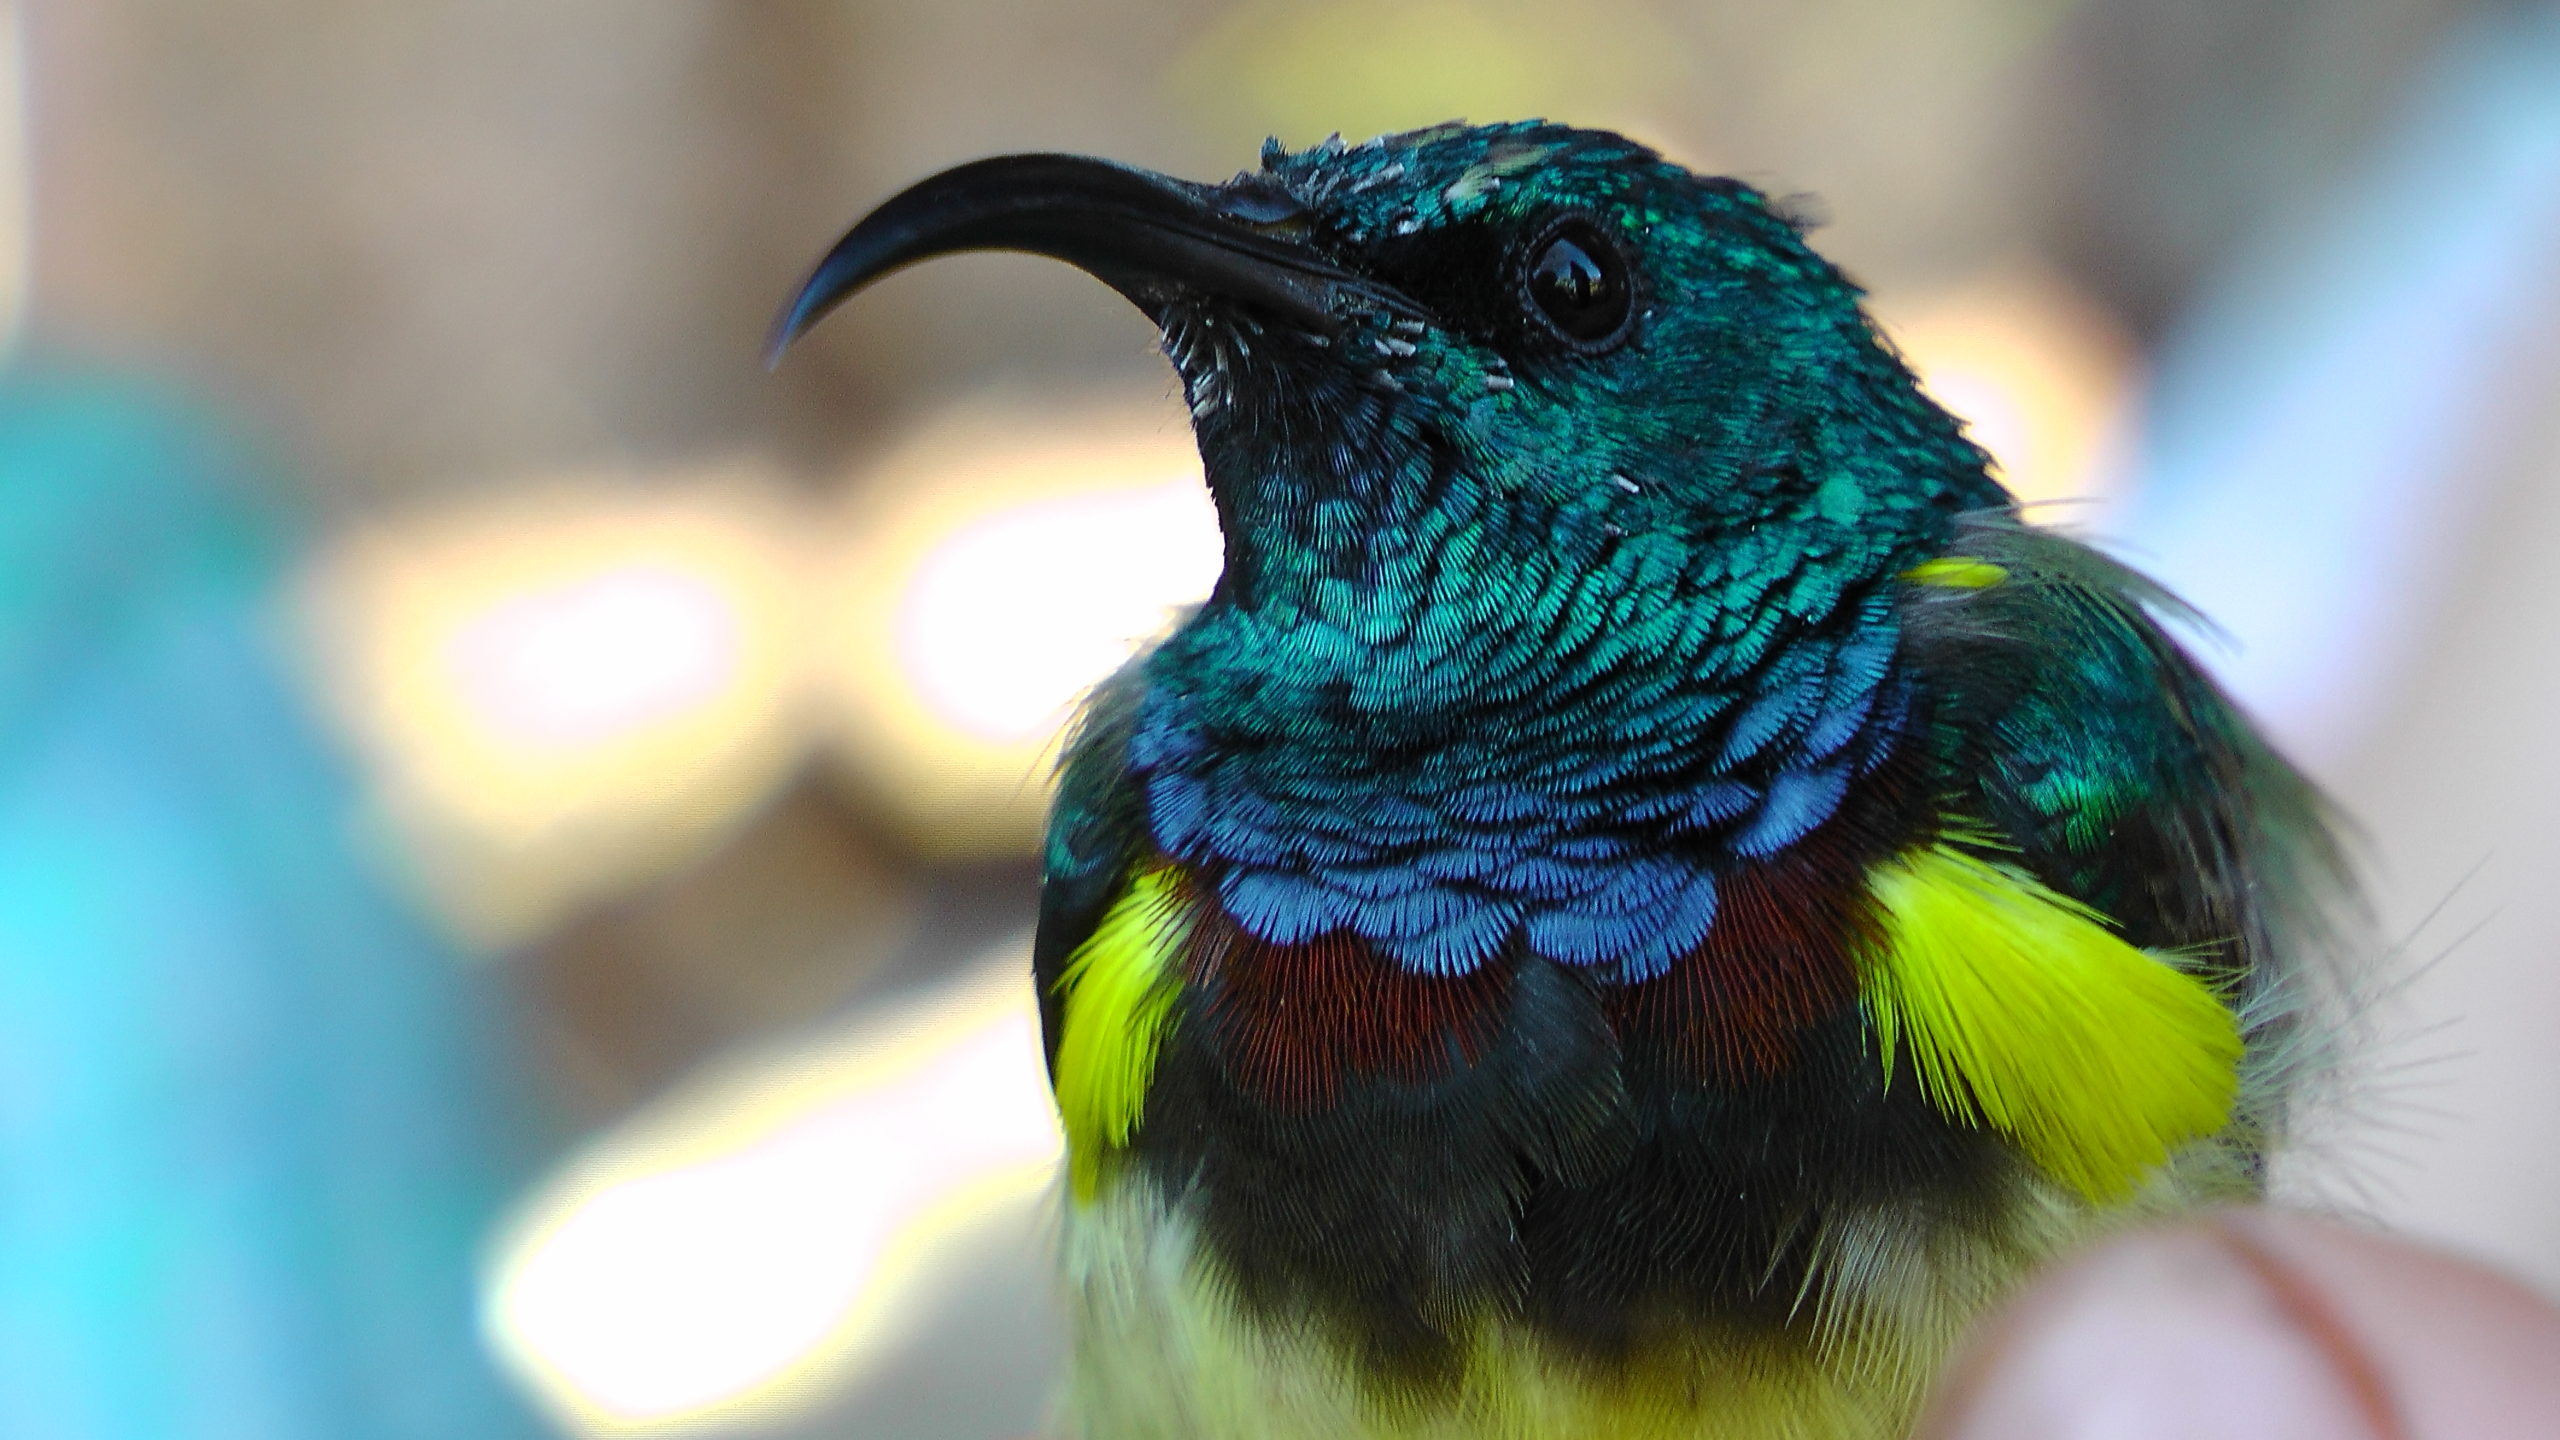 A Sunbird, its feathers are wonderful colours of yellows, blues, greens and browns